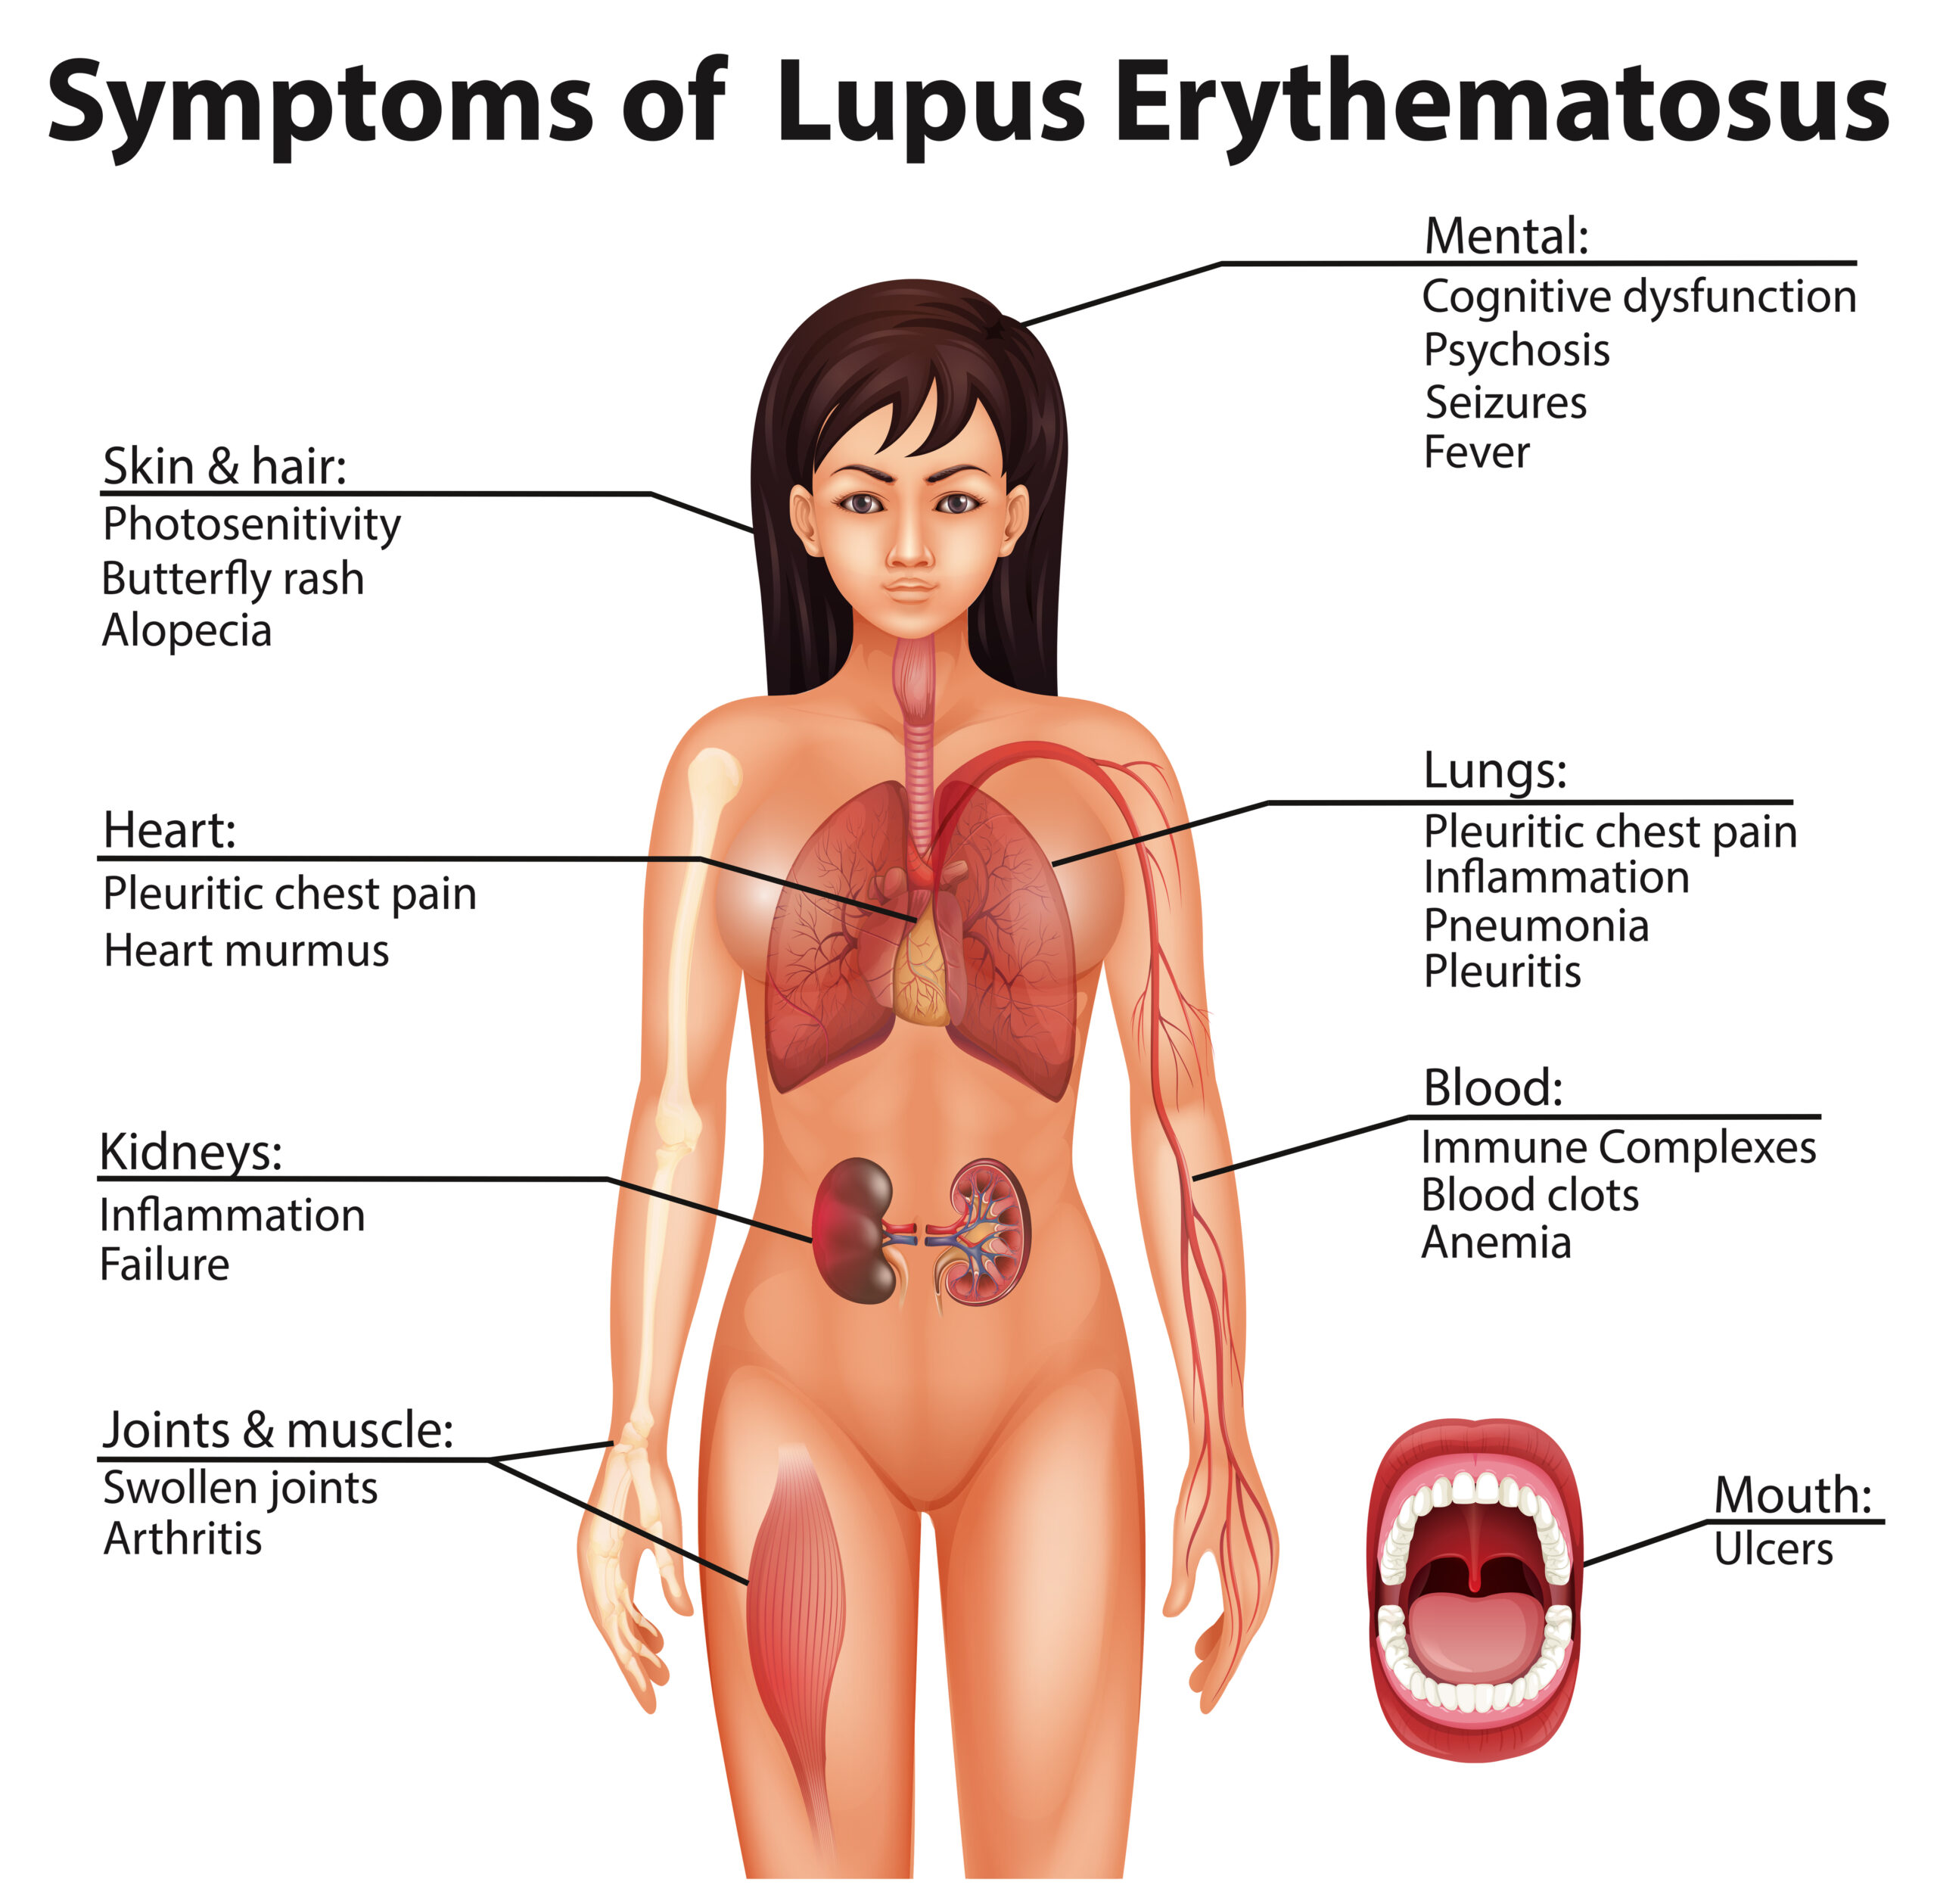 Lupus: Symptoms, Causes, Types, and Treatments